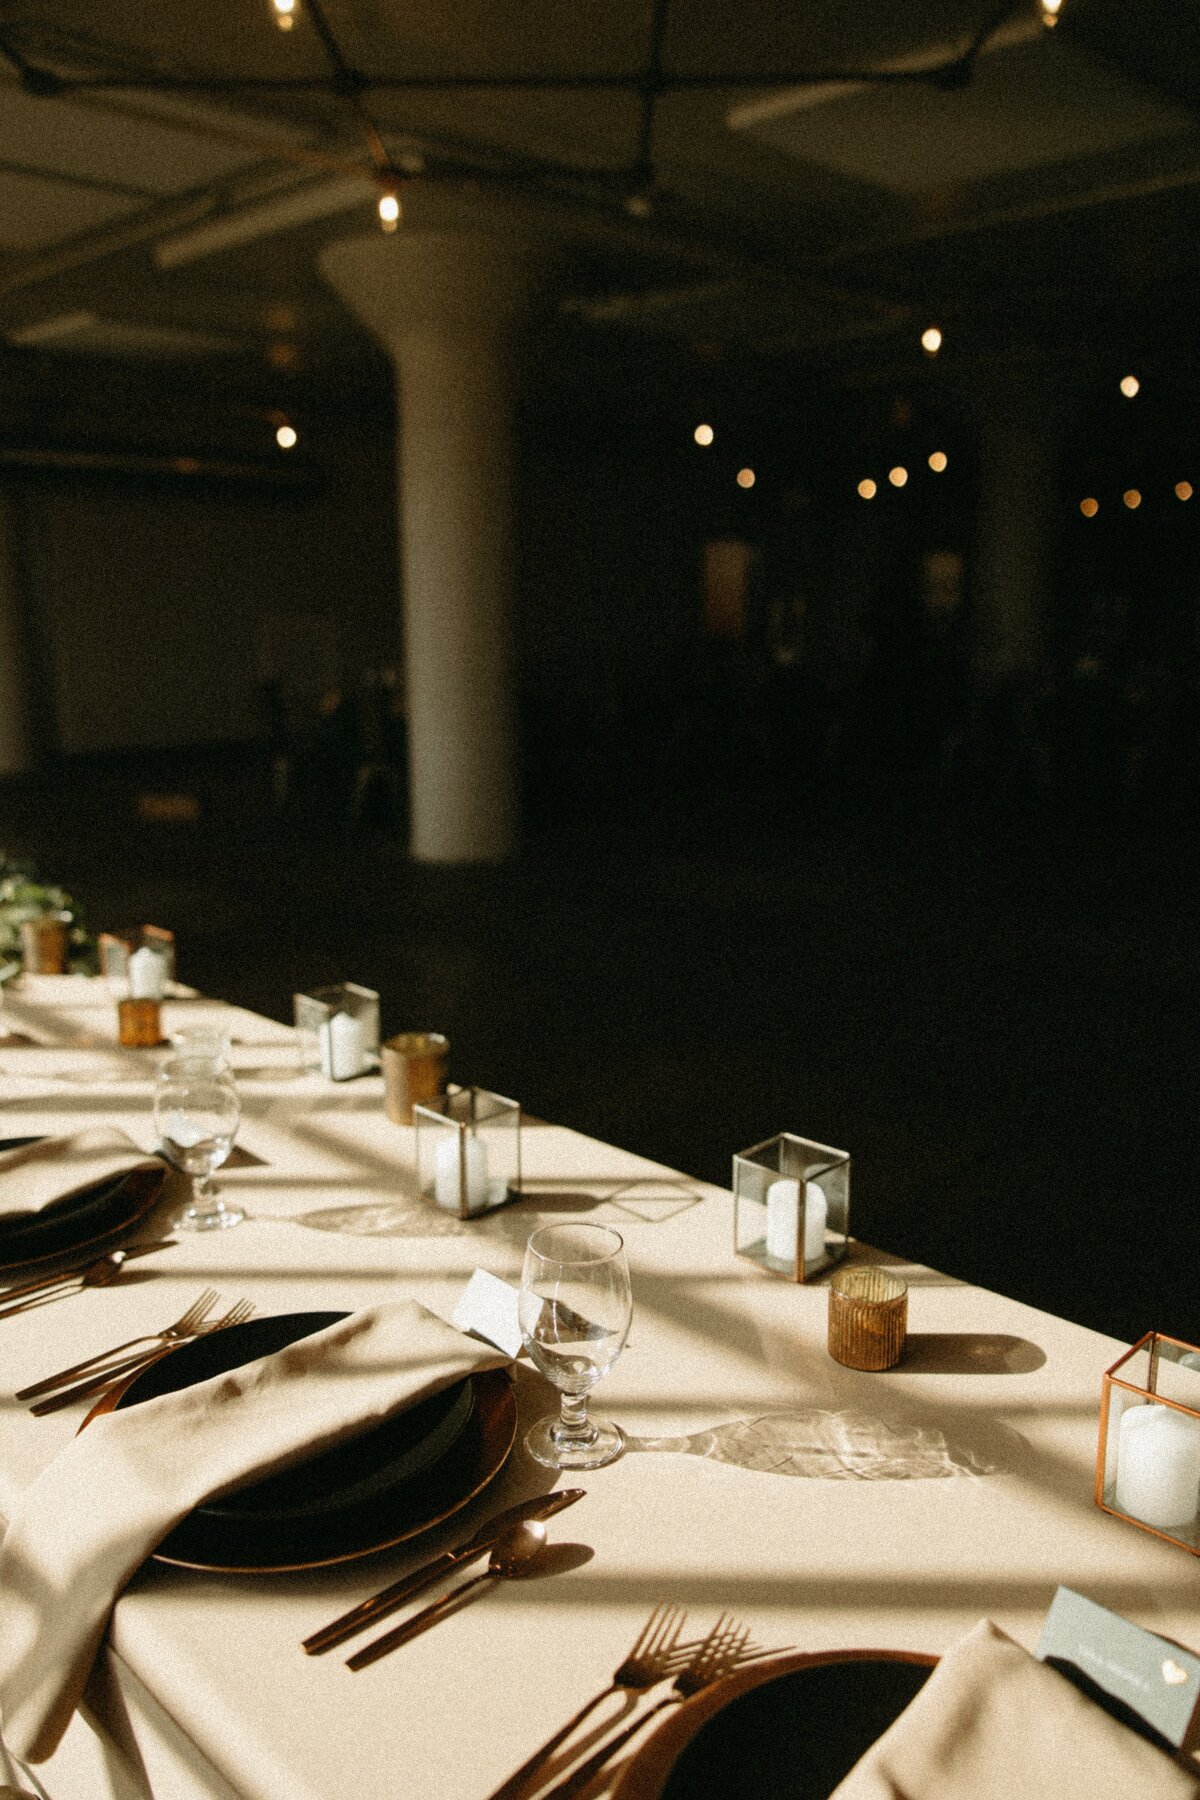 Elegant dinner setup in a dimly lit room with a long table covered in a white cloth, featuring plates, silverware, and small decorative items, perfect for events in Davenport.